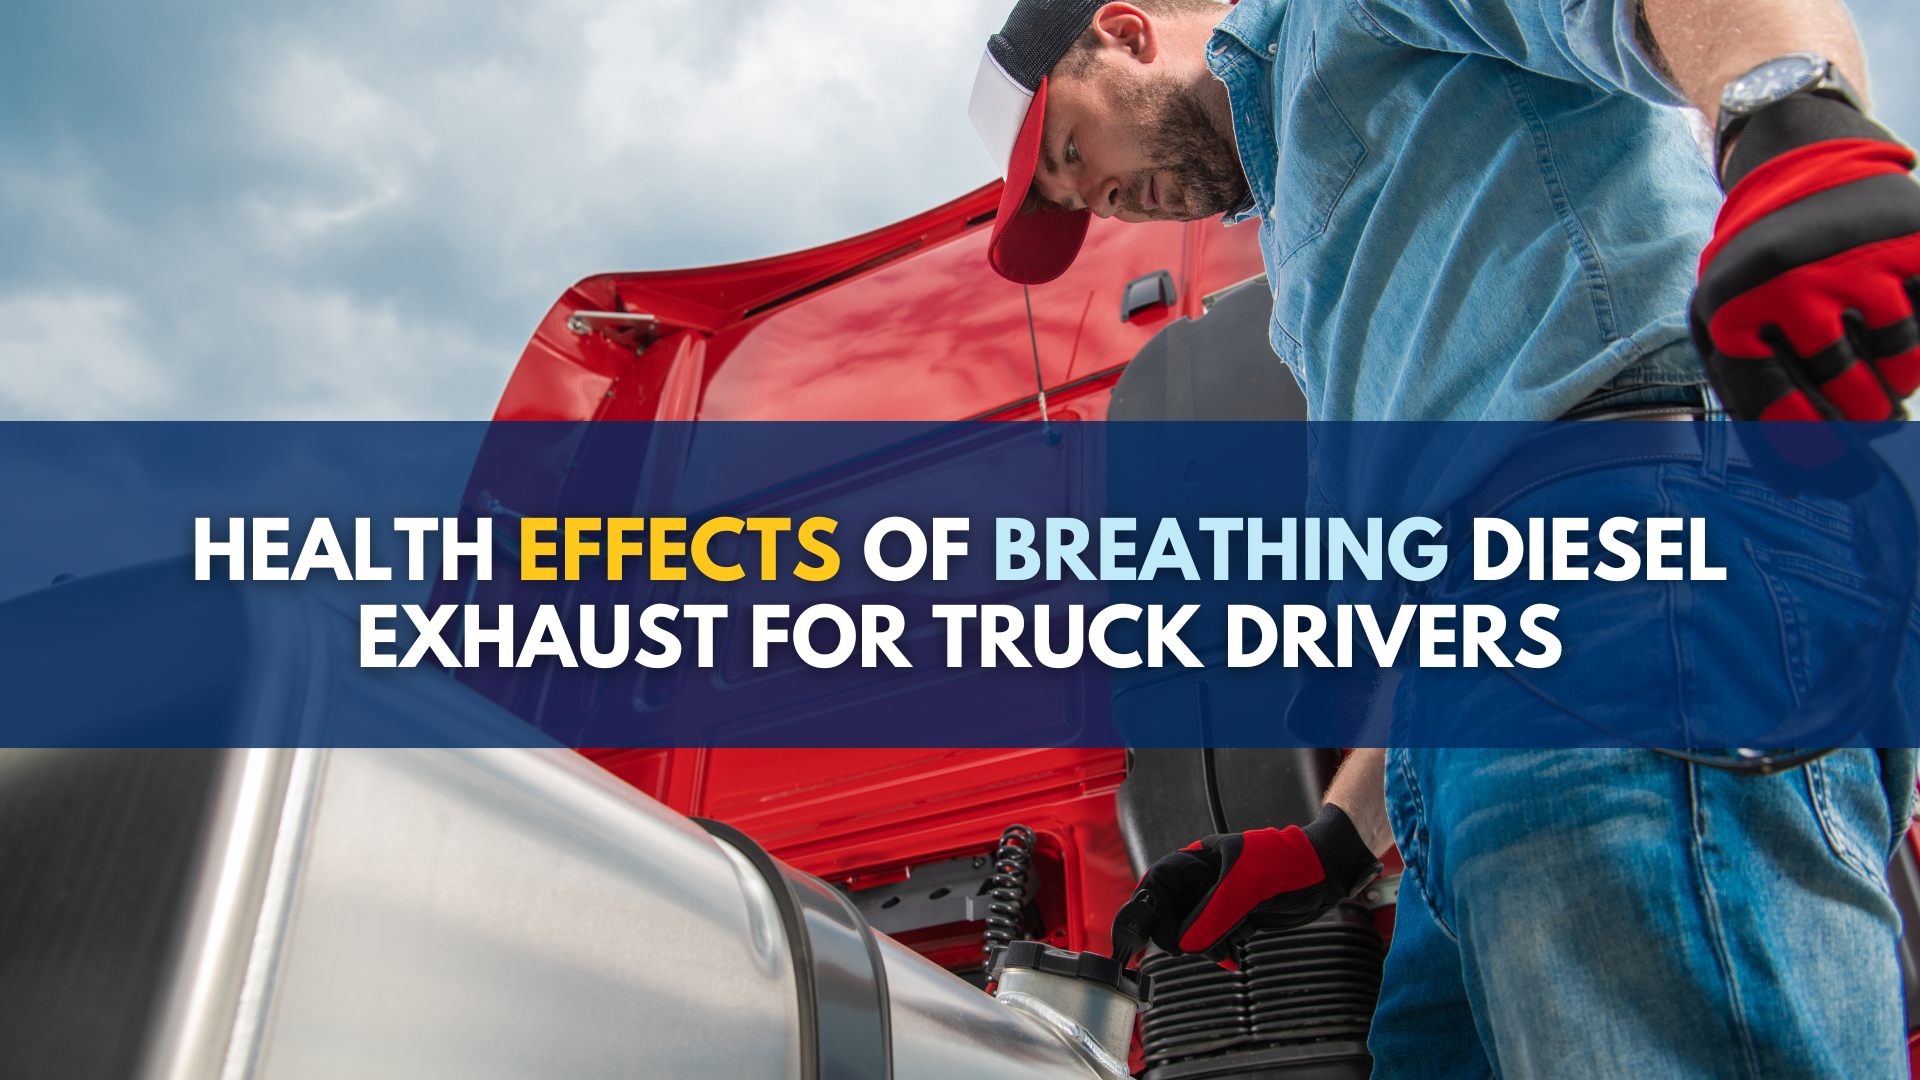 Health effects of breathing diesel exhaust for truck drivers